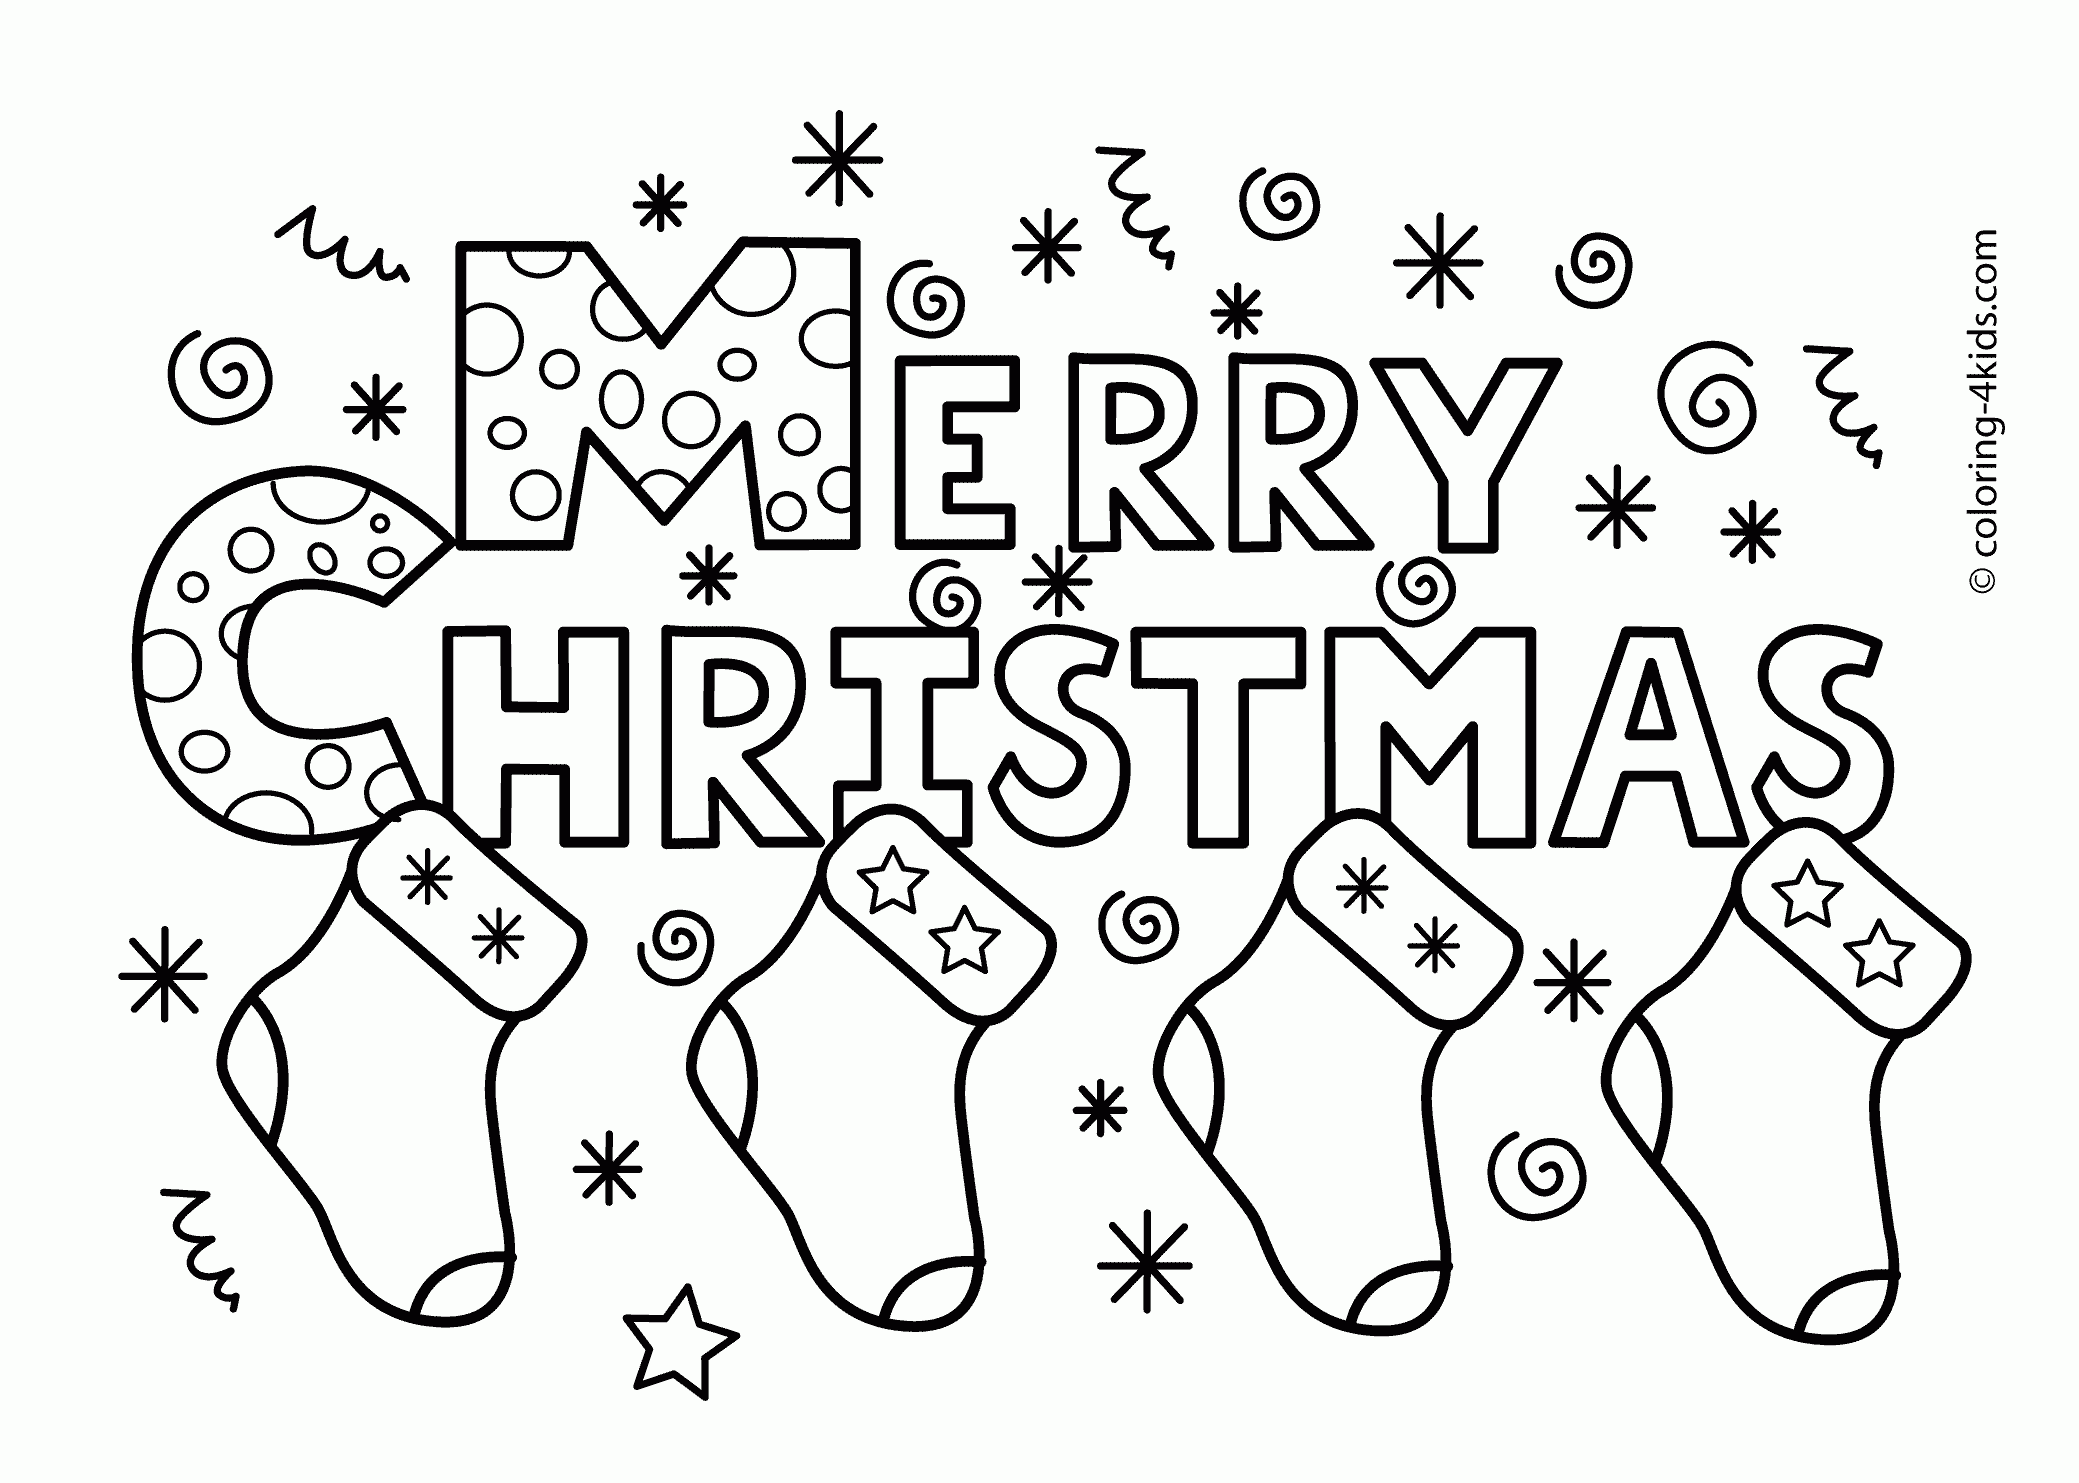 Merry Christmas Socks Coloring Pages For Kids, Printable